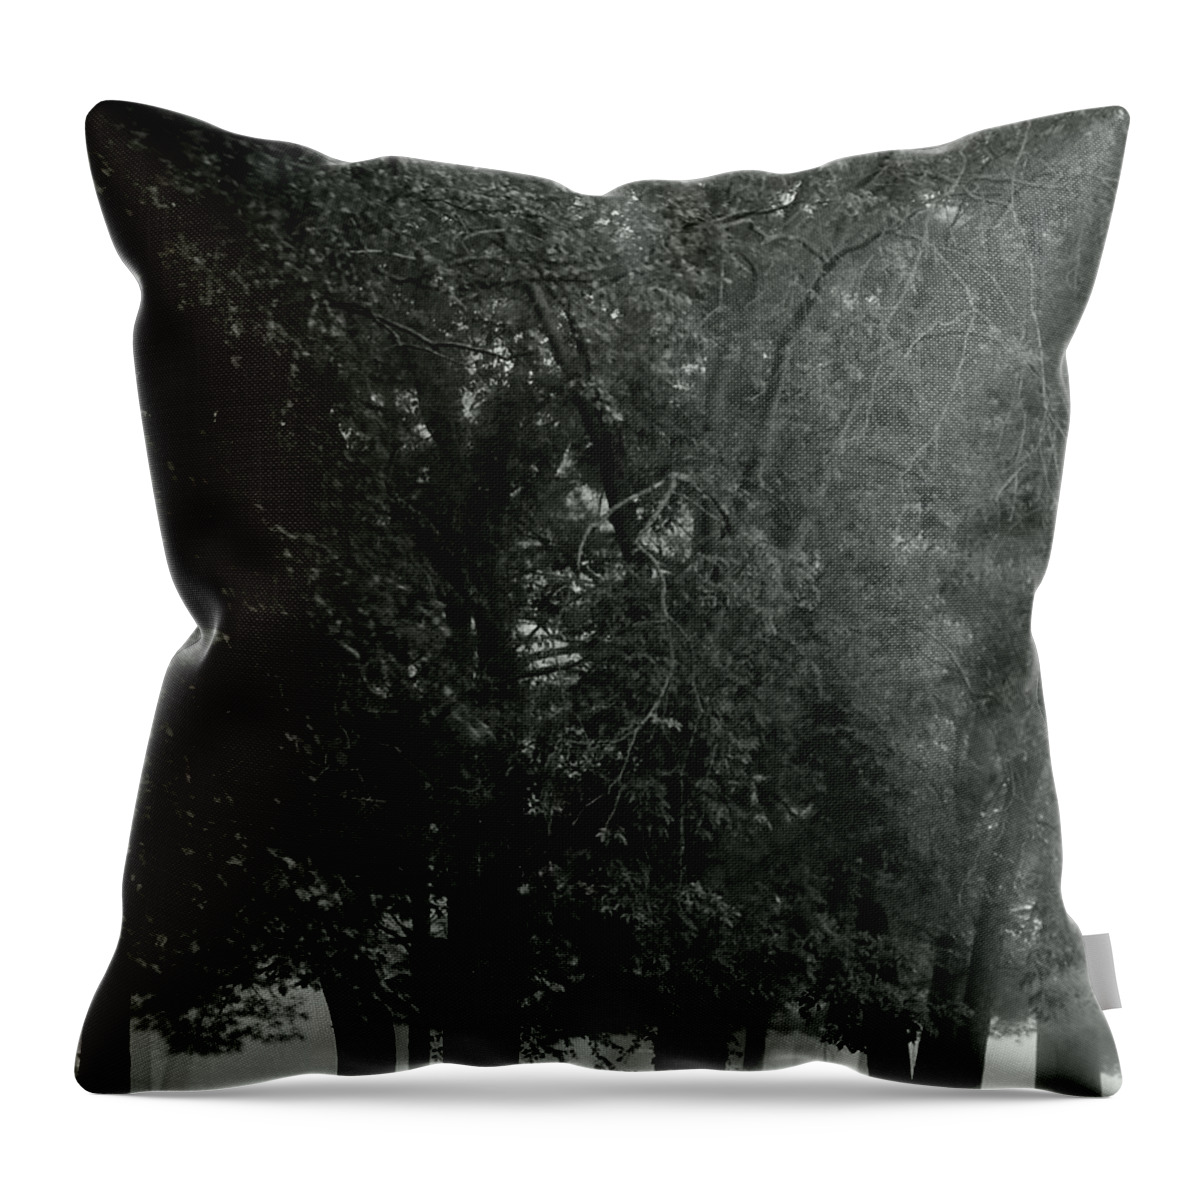 Mist Throw Pillow featuring the photograph So Quiet In Here by Wild Thing